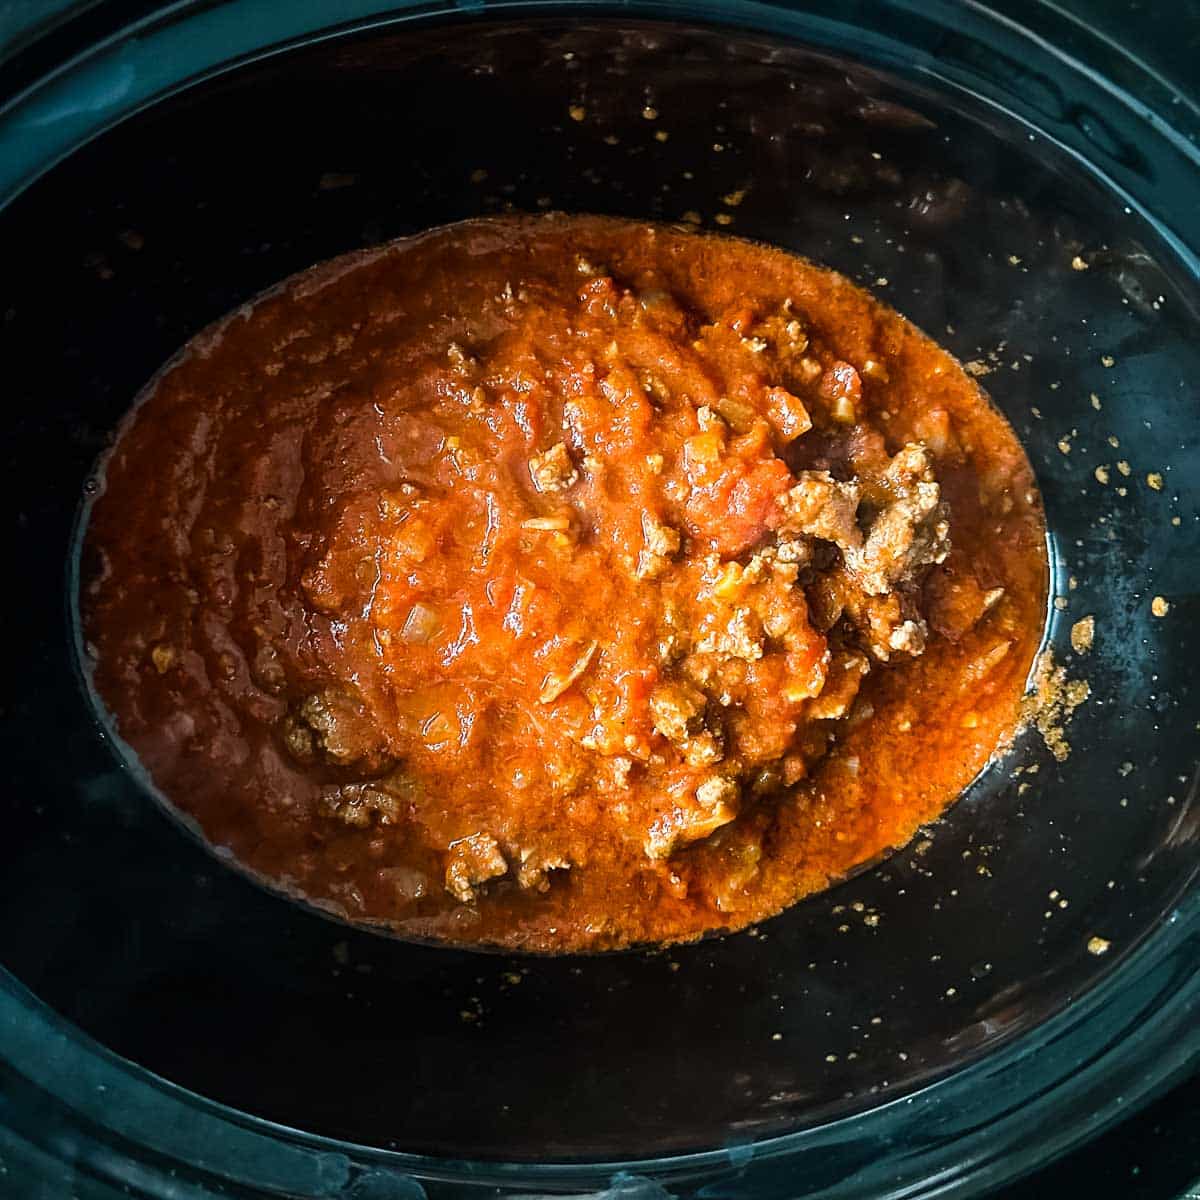 lamb ragu is transferred to a slow cooker.